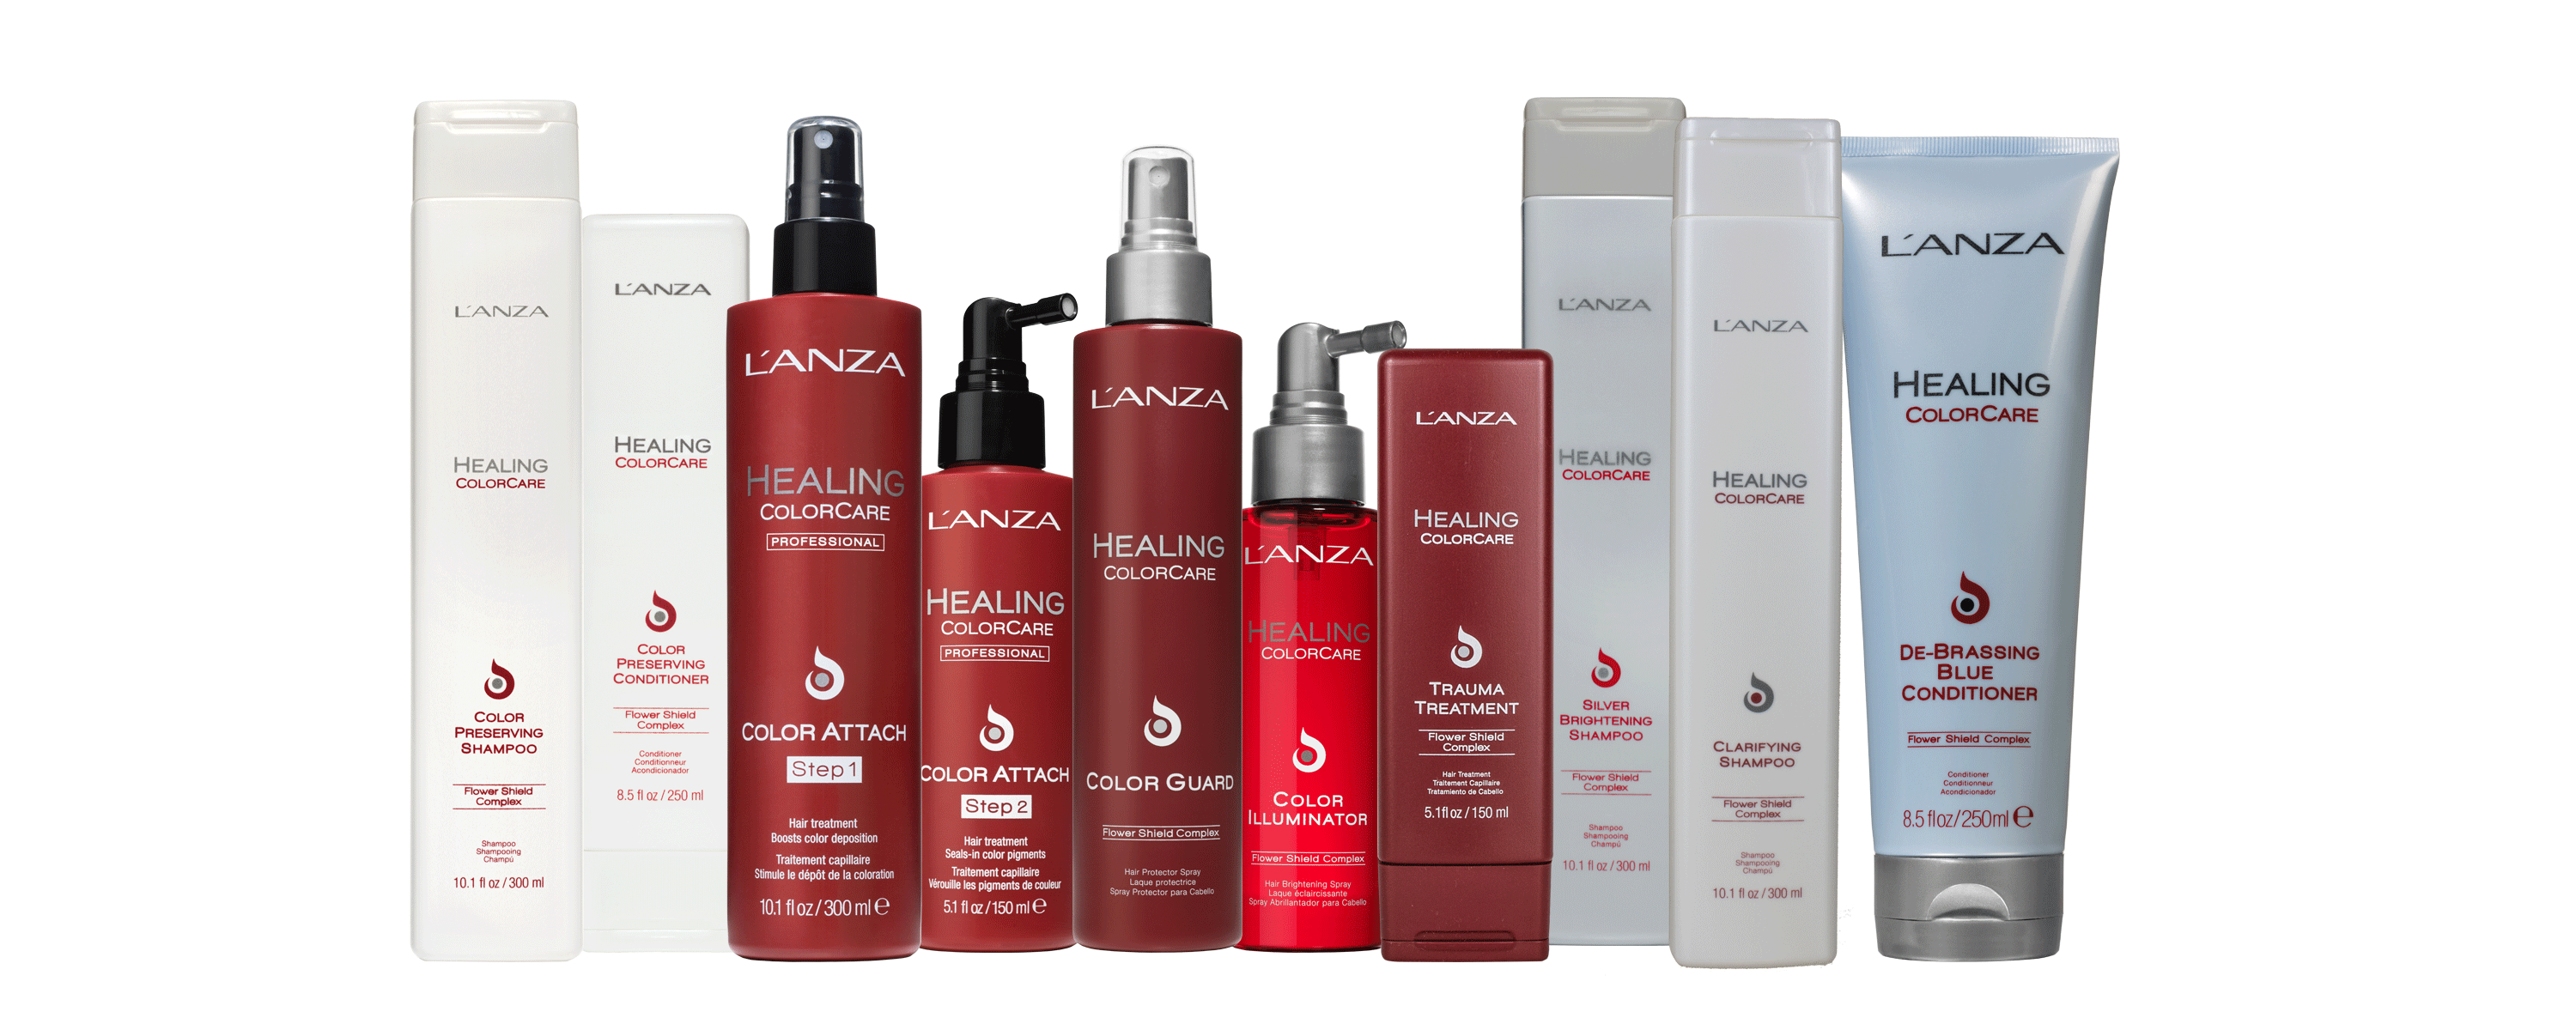 Collection of LANZA Healing ColorCare products lined up